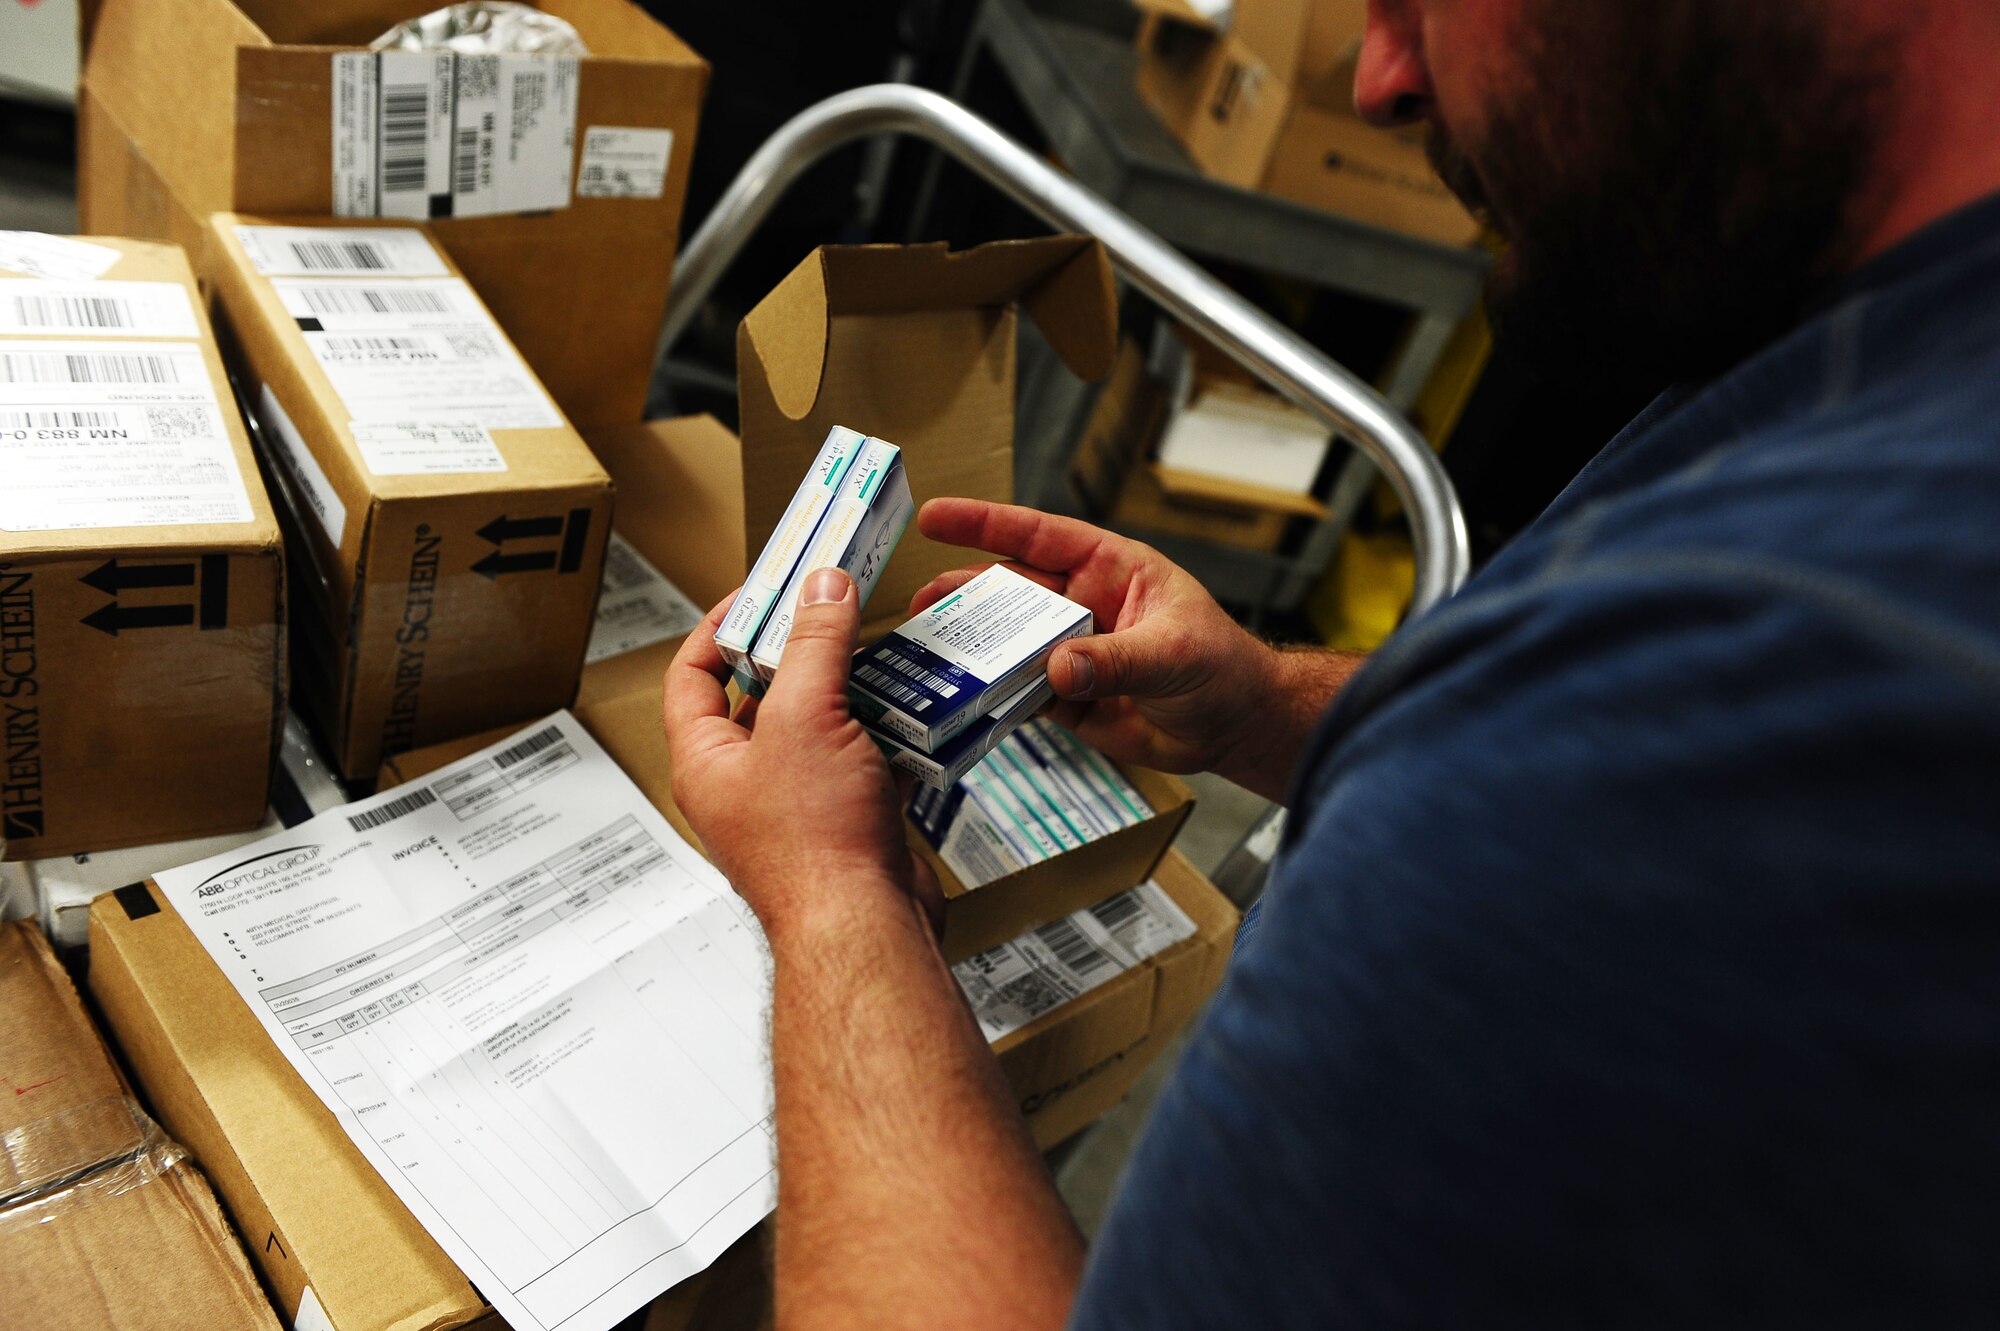 Herbert Carrillo, a medical logistics technician with the 49th Medical Logistics Flight, checks the labels on prescription contacts as he packs them into boxes inside the Medlog warehouse Aug. 14. Medlog is responsible for ordering all supplies, prescriptions and equipment for the medical clinic. (U.S. Air Force photo by Airman 1st Class Randahl J. Jenson)